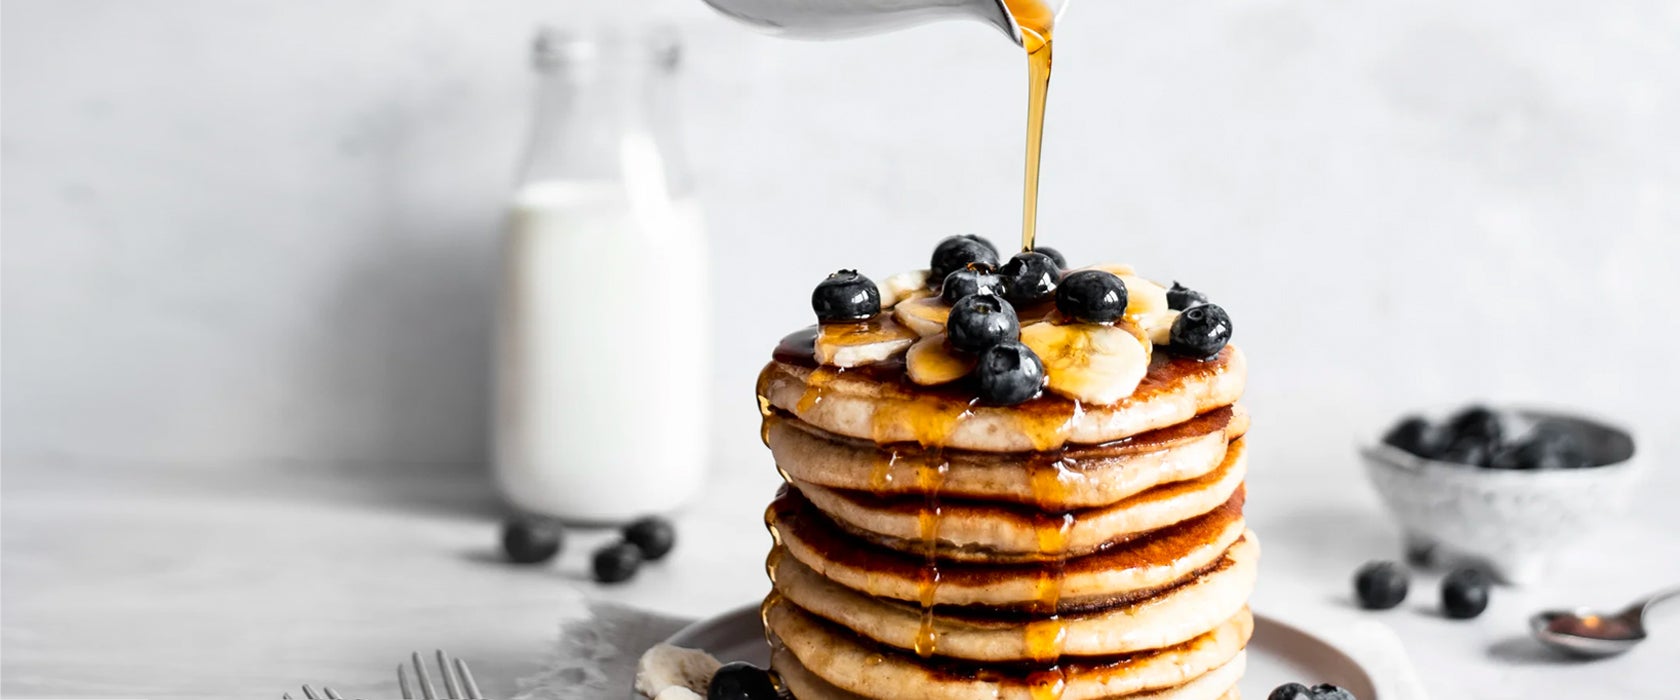 A stack of vegan pancakes with sliced banana and blueberries, drizzled with golden syrup